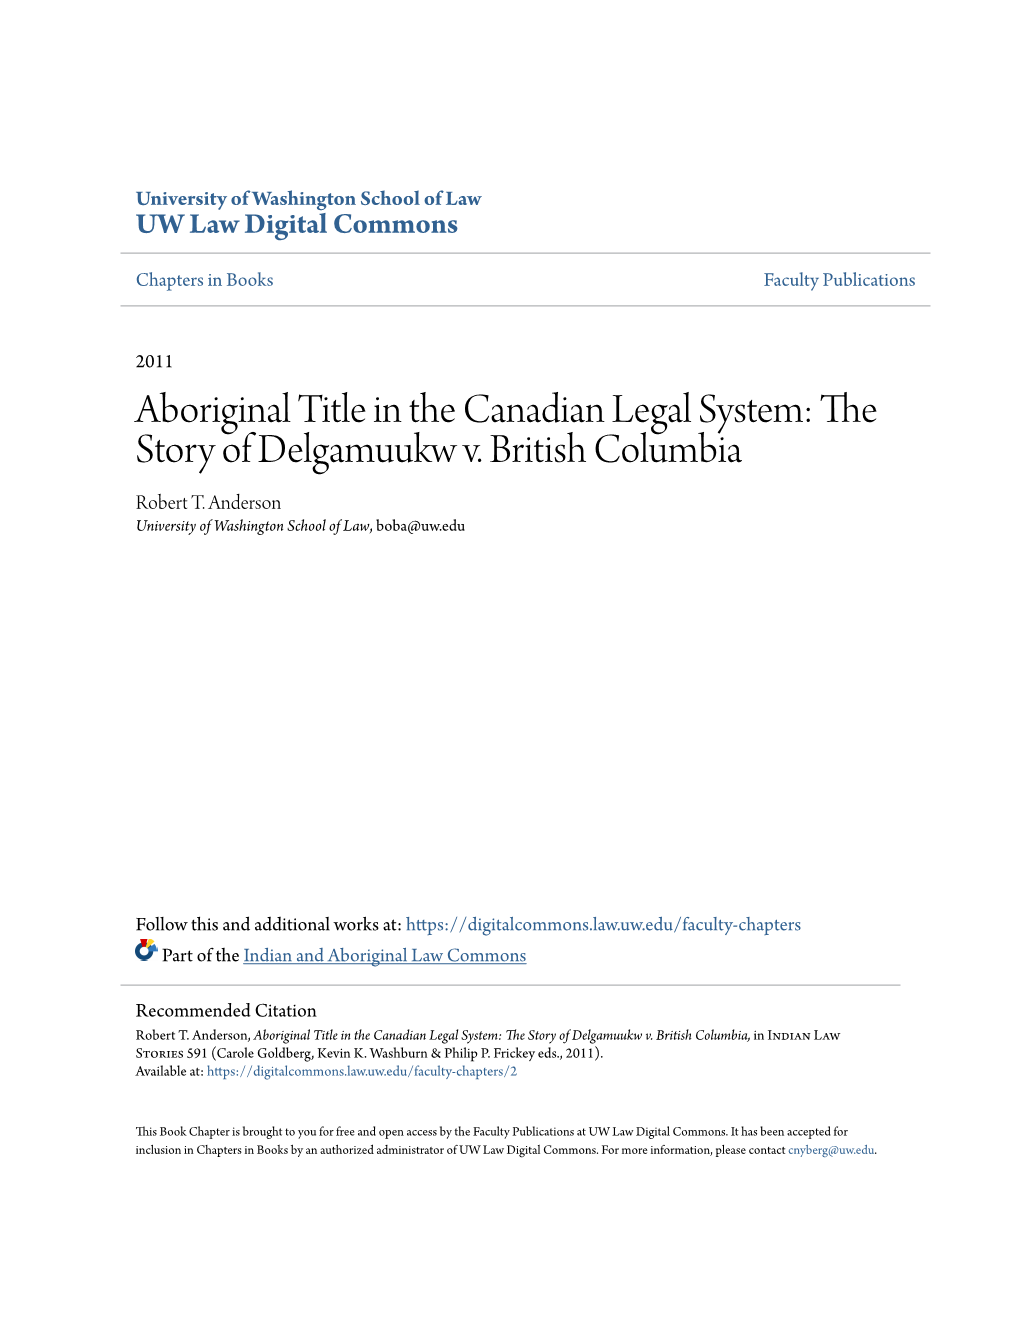 Aboriginal Title in the Canadian Legal System: the Story of Delgamuukw V